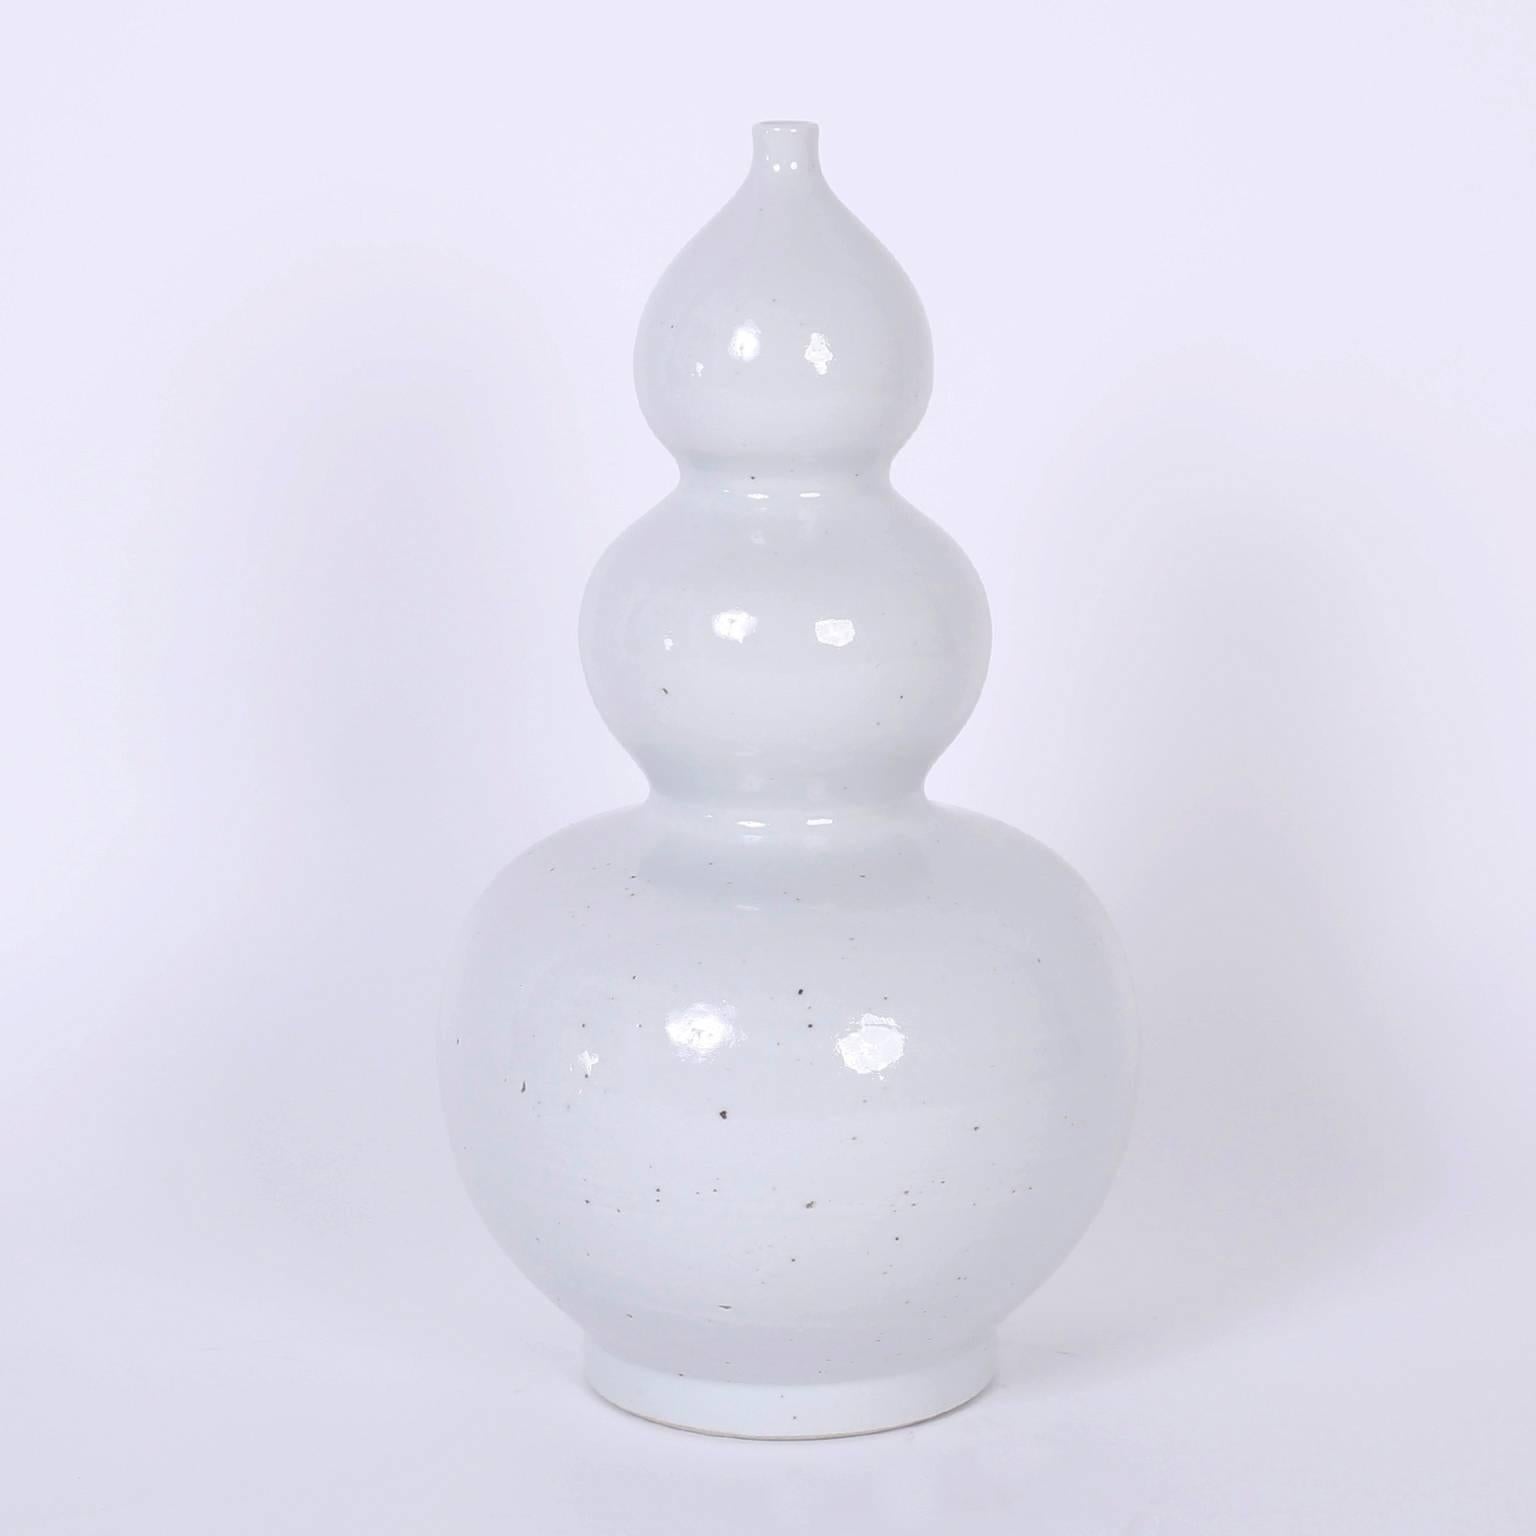 Graceful pair of Chinese porcelain style vases with a pale mellow celadon glaze over a sleek timeless triple gourd form, bridging tradition with modern.